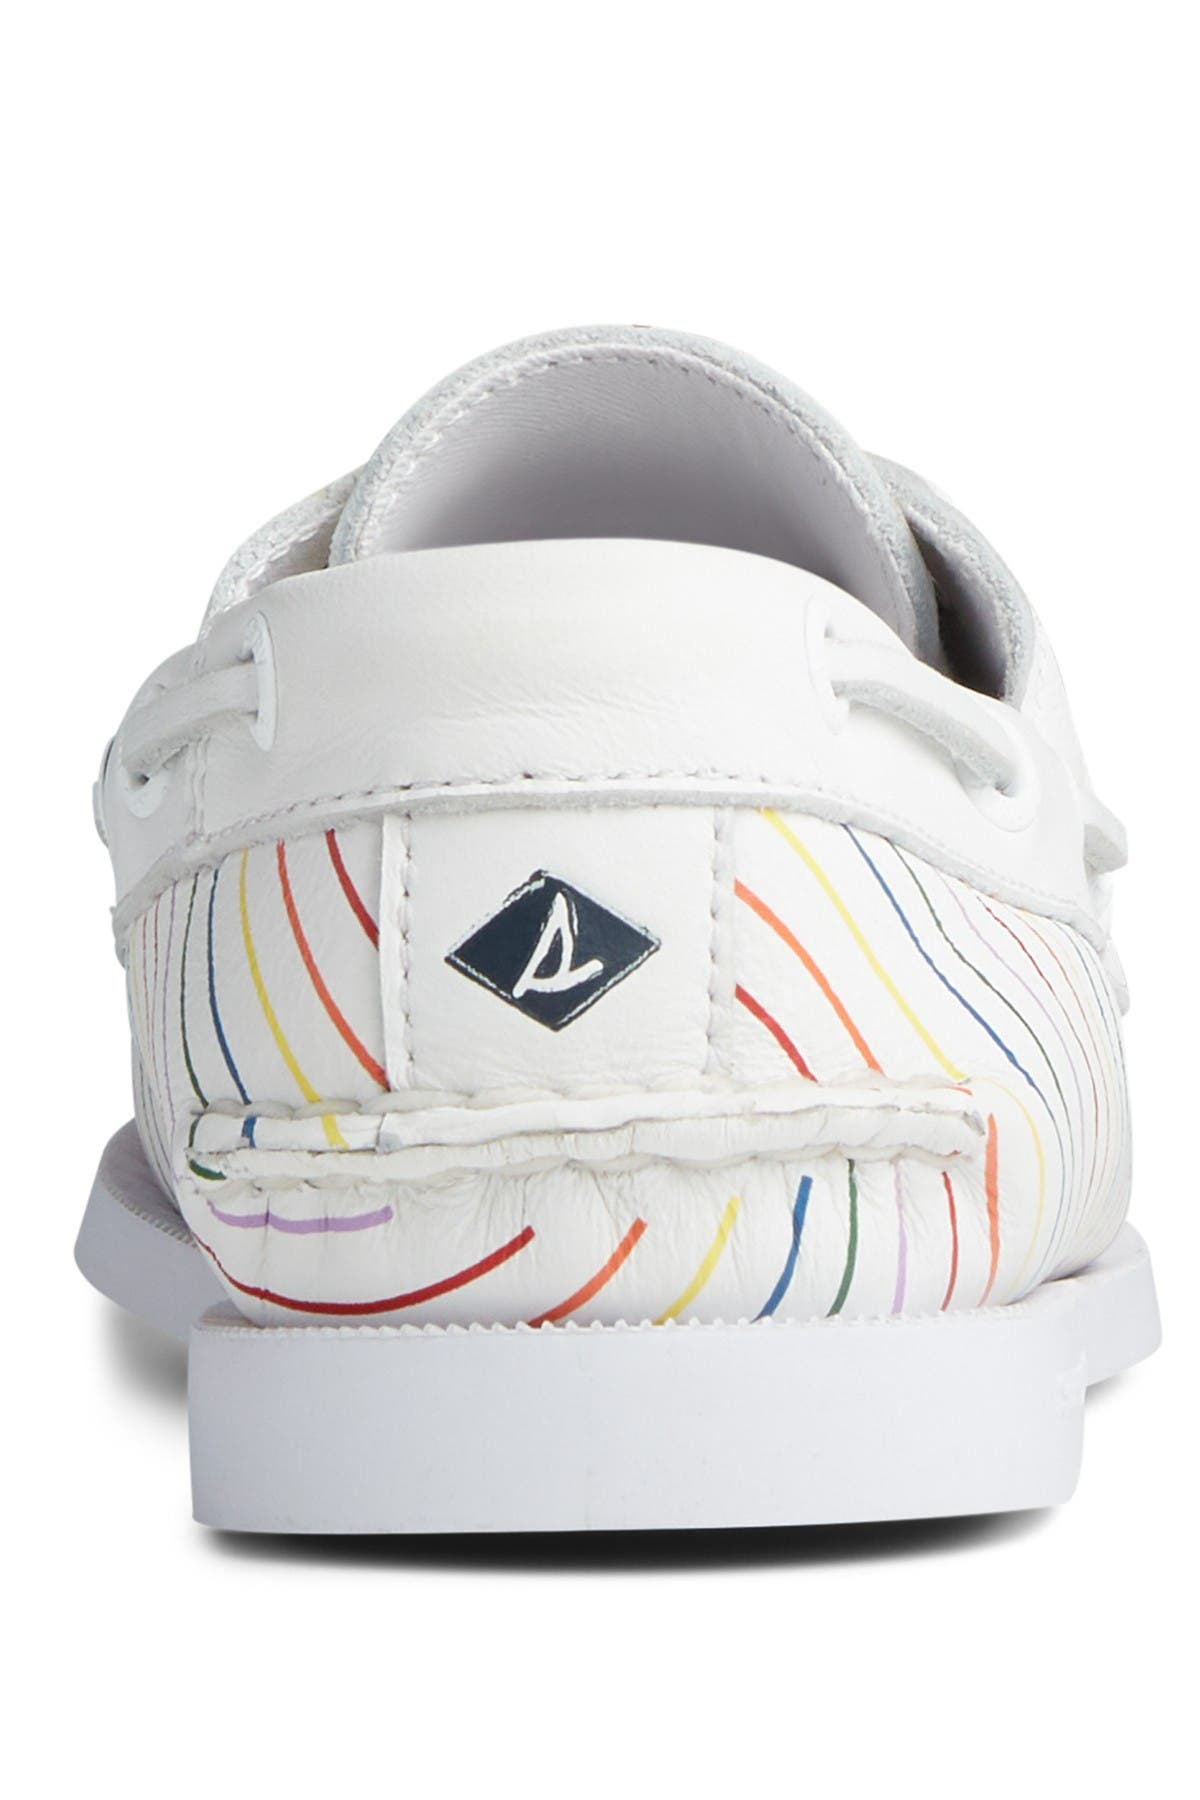 sperry pride shoes